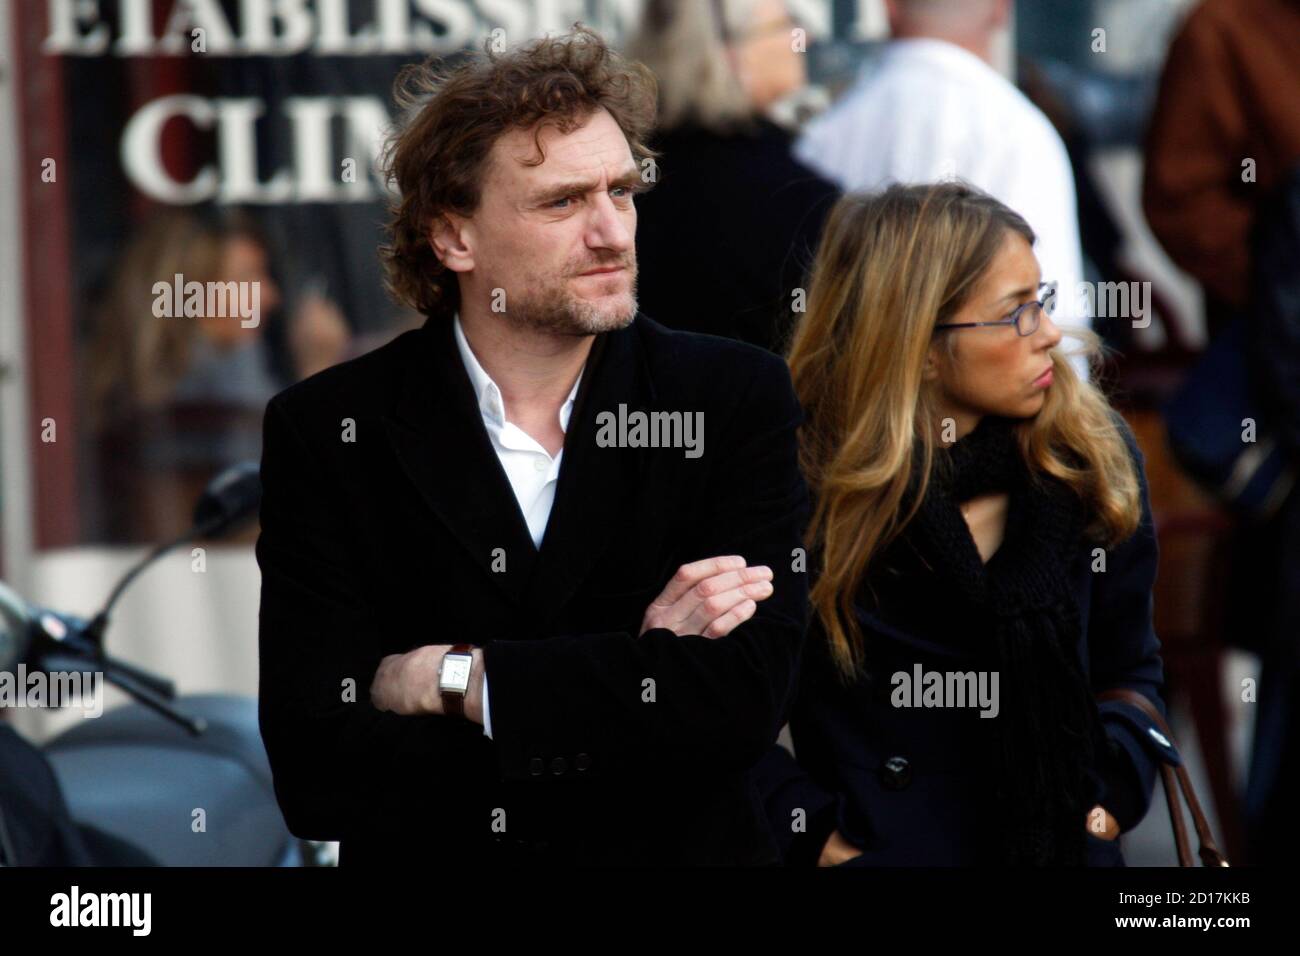 French actor Jean-Paul Rouve (L) arrive at the funeral service for French  actor Guillaume Depardieu at the church in Bougival, near Paris, October  17, 2008. French film star Gerard Depardieu's son Guillaume,